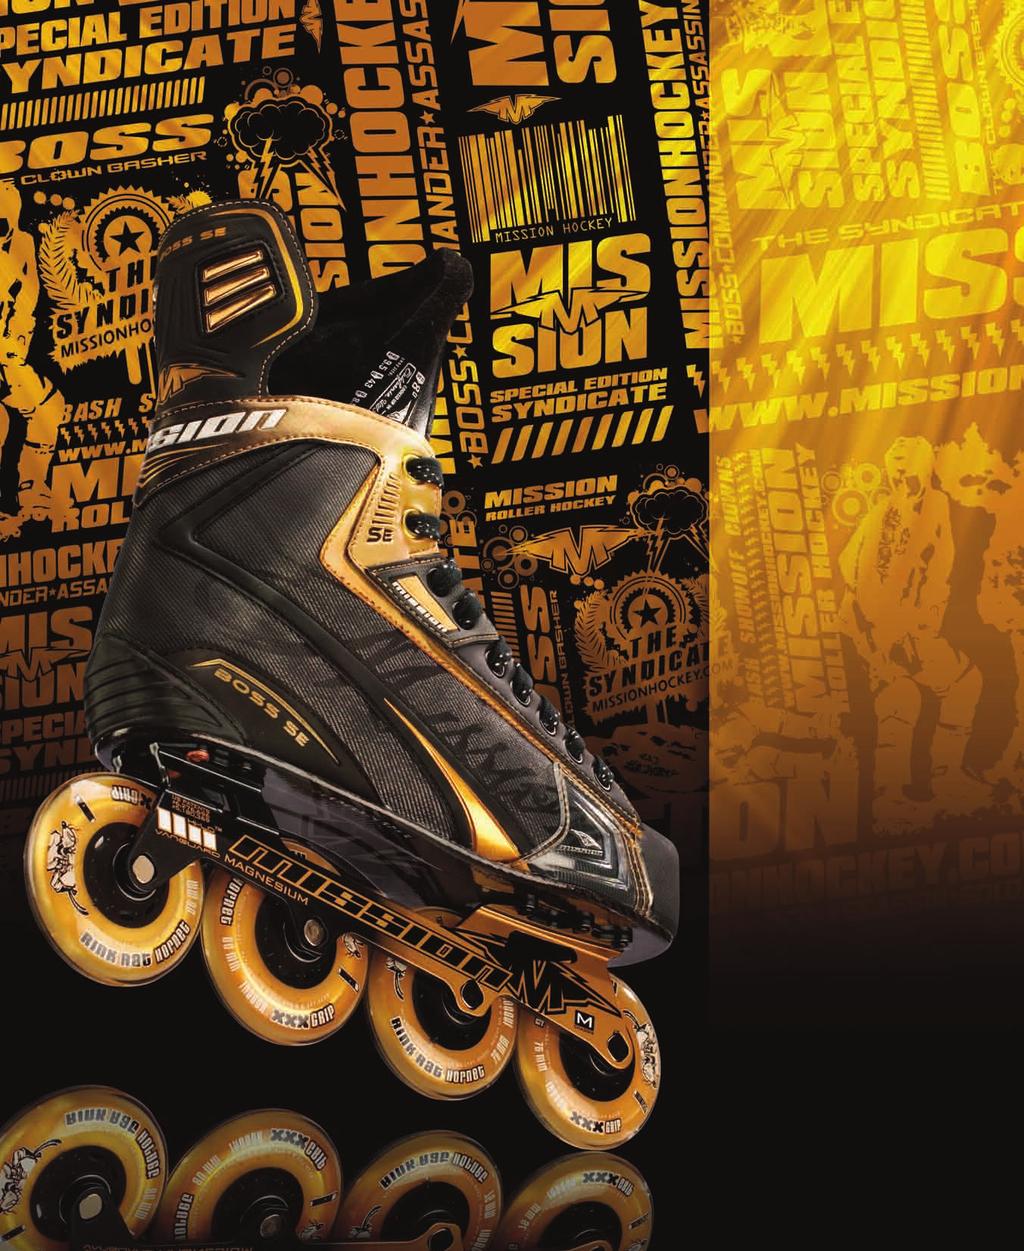 NEW SIZING ON ALL 2010 MISSION SKATES We redesigned